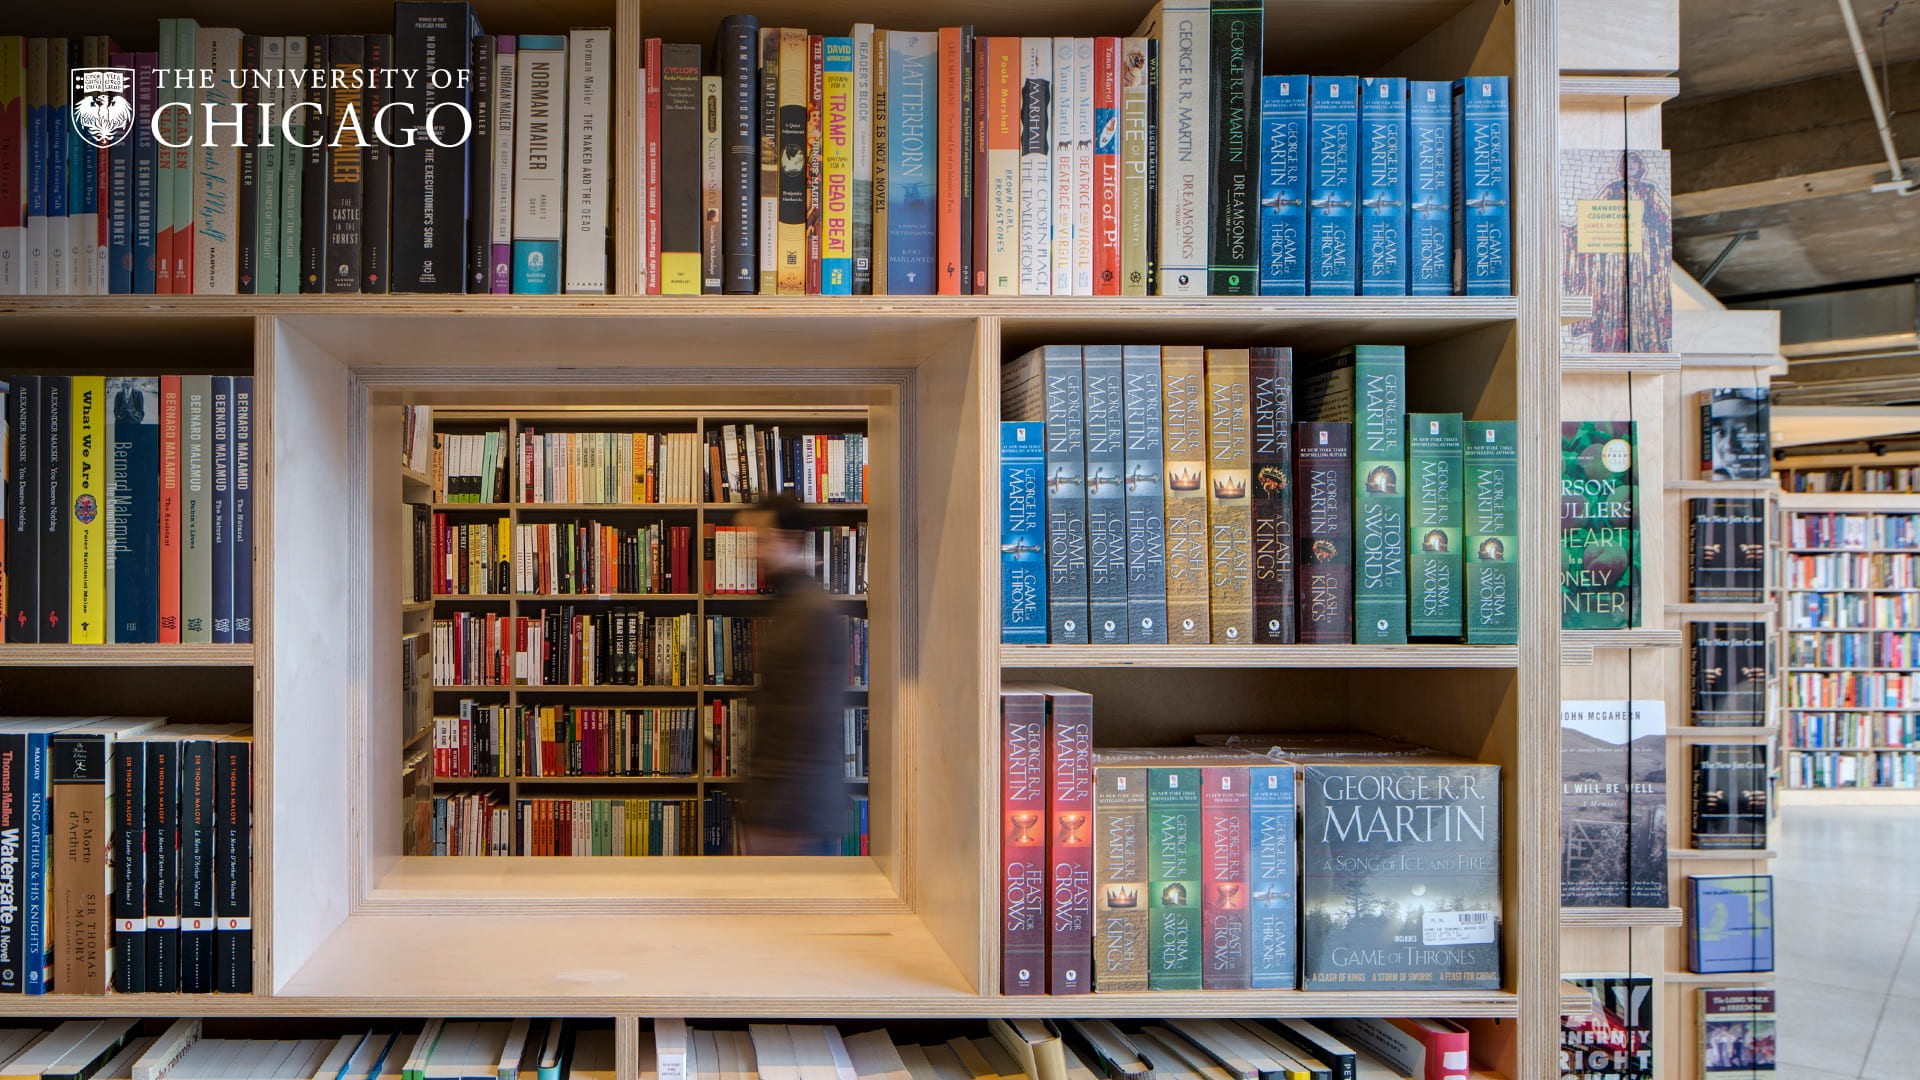 Looking through an opening in a bookshelf at a blurred person walking in the background